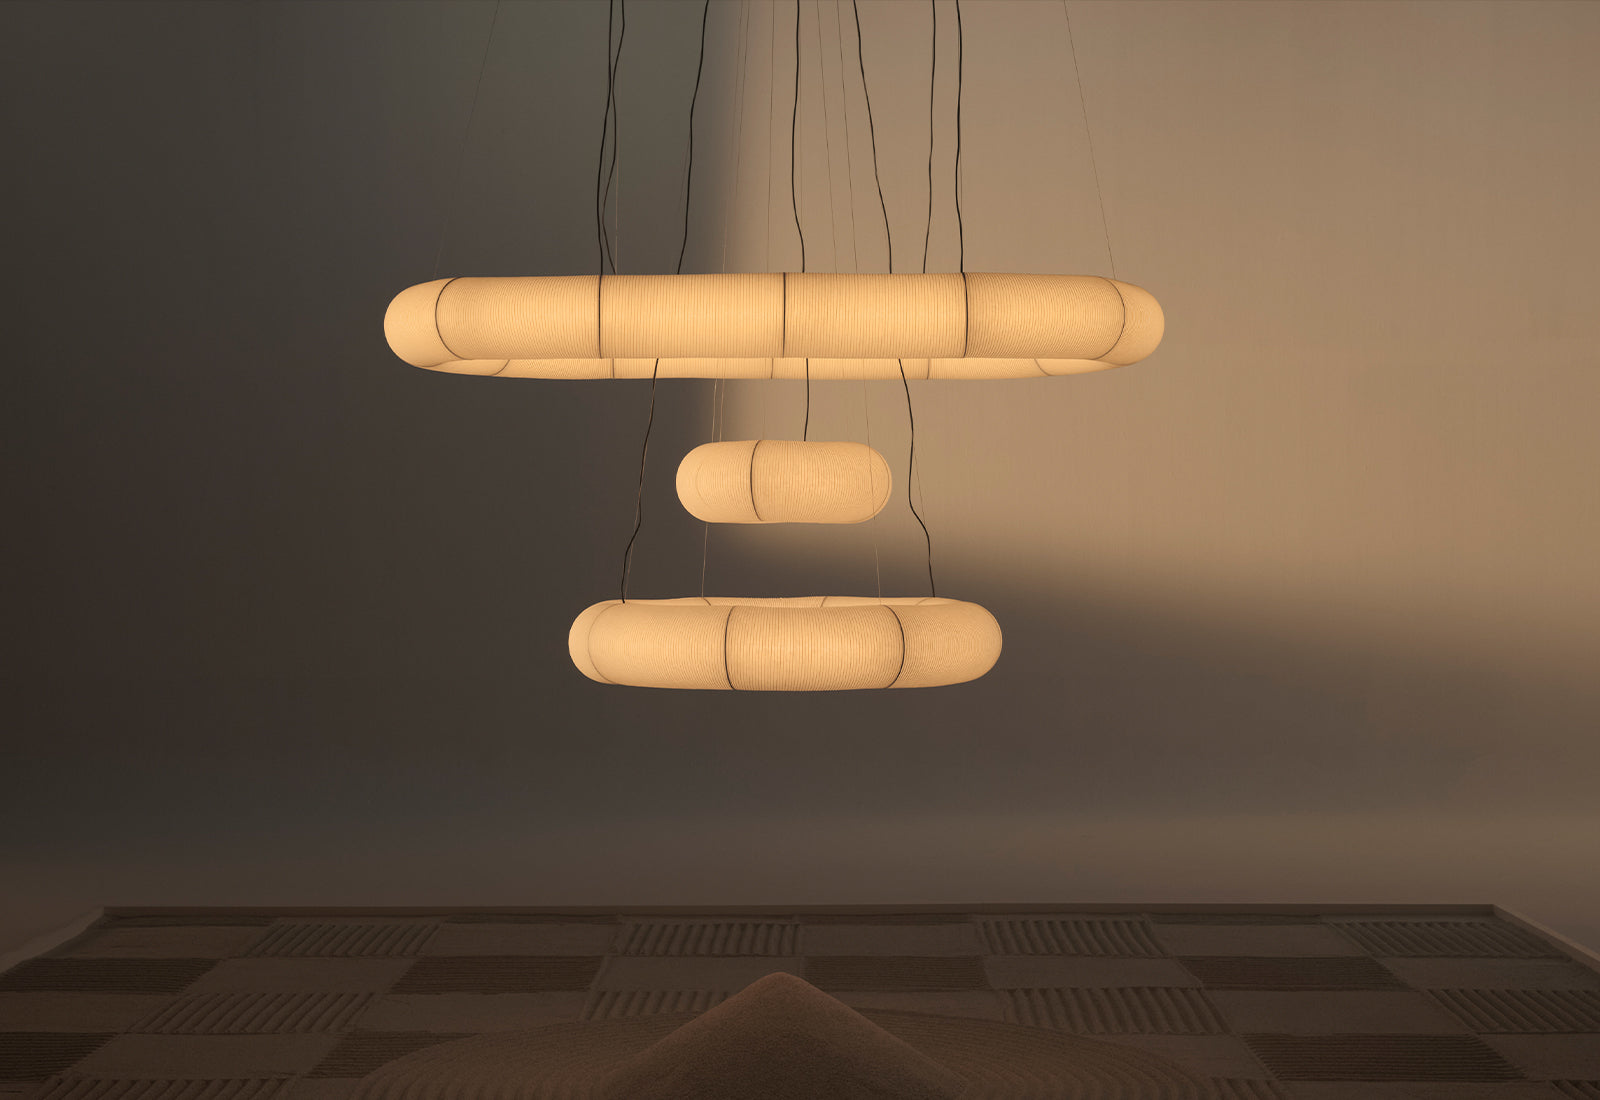  All the three sizes of the Tekio Circular pendant light by Anthony Dickens for Santa & Cole.